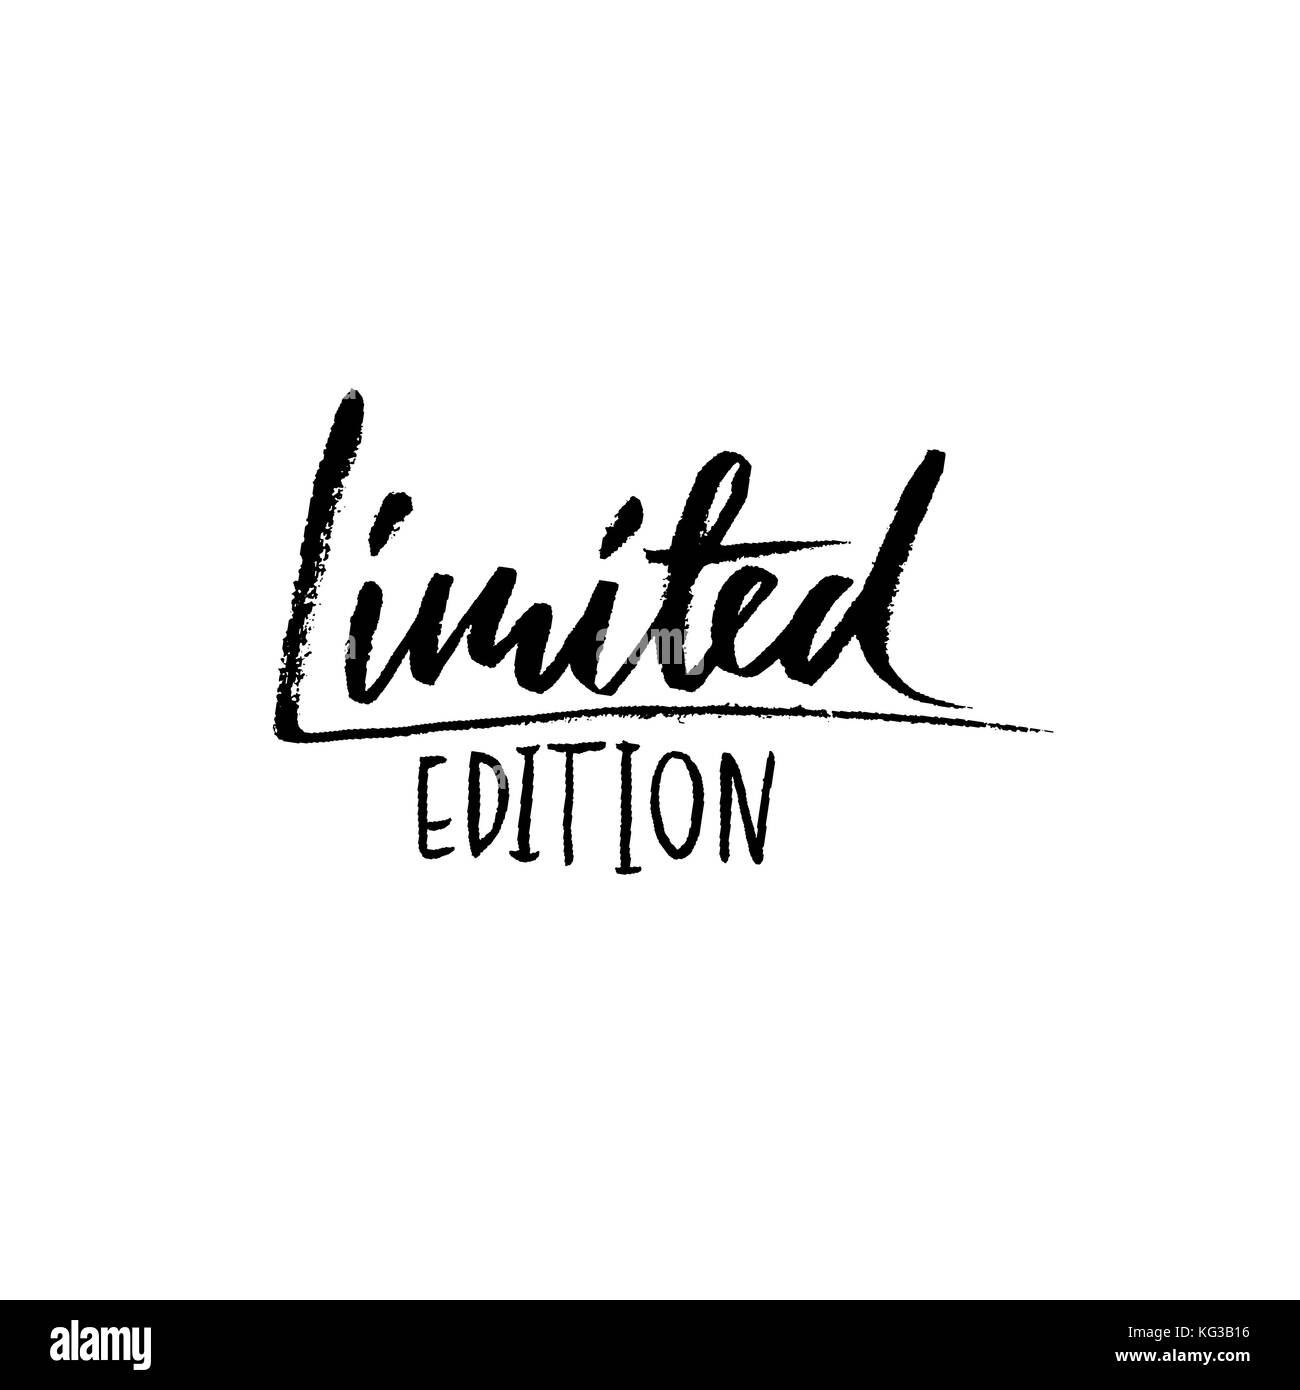 Limited edition text Stock Vector Images - Alamy